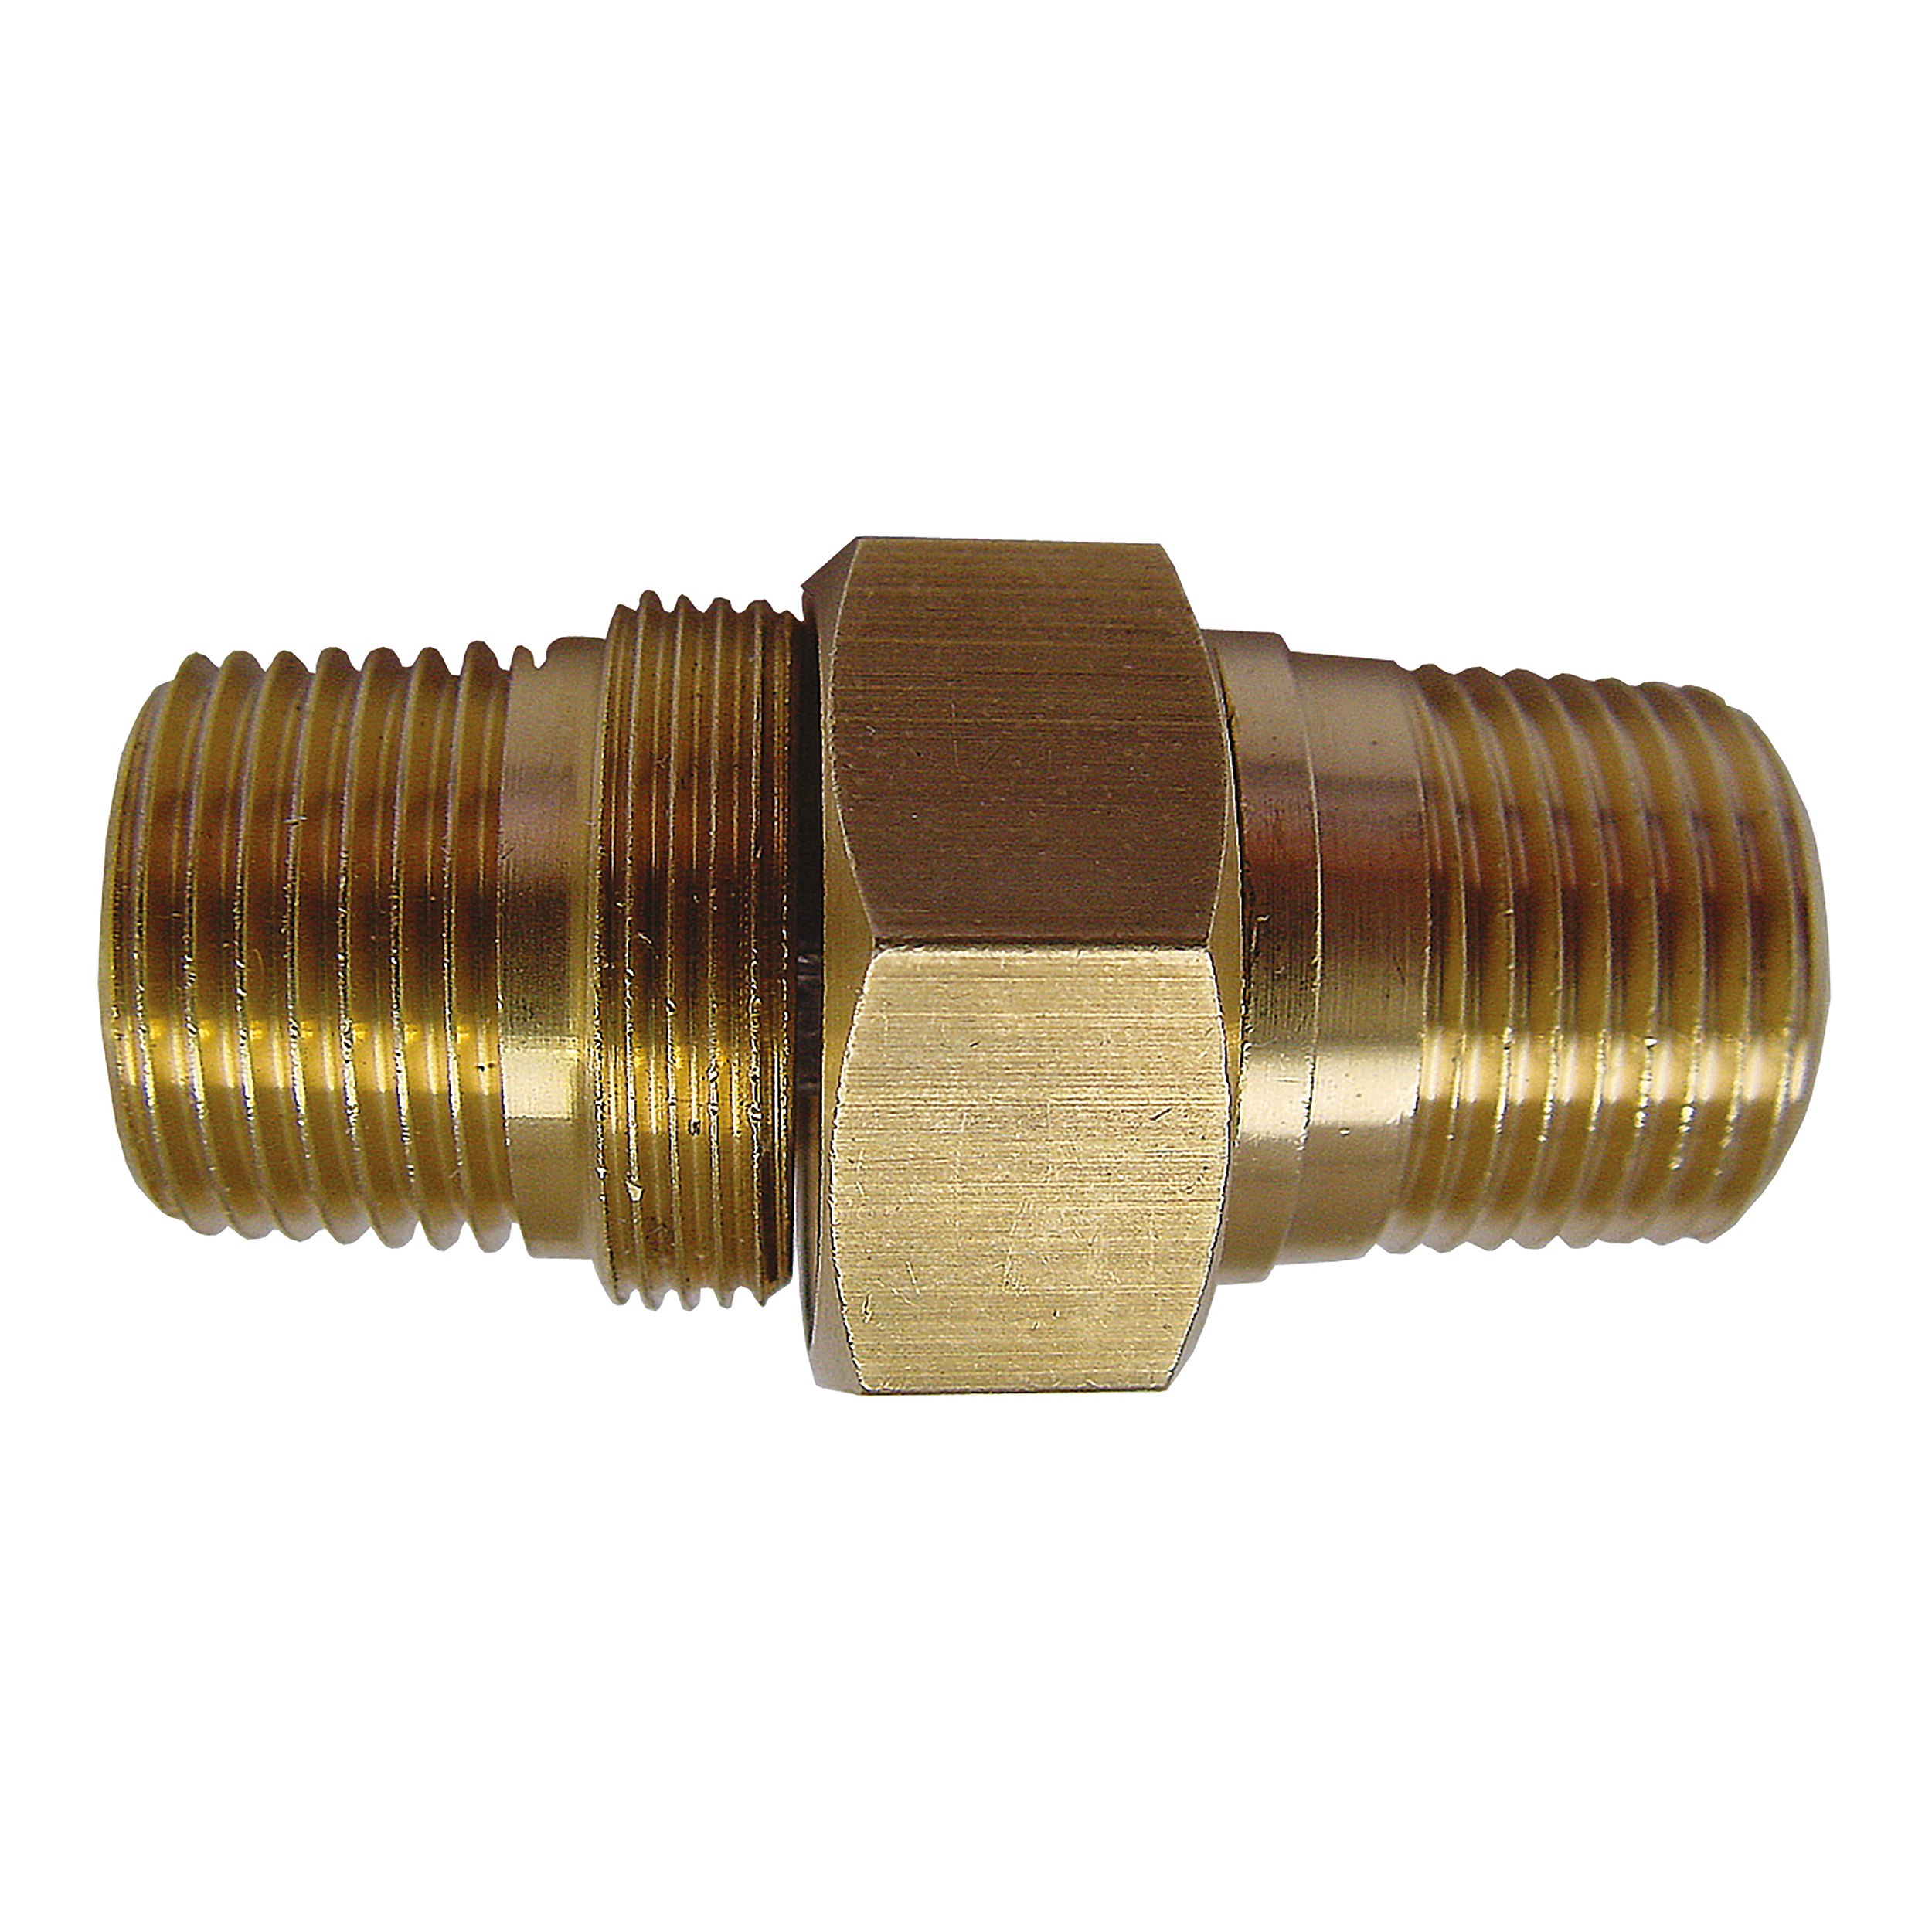 Double nipple fitting (brass), male thread, detachable (3-pieces)